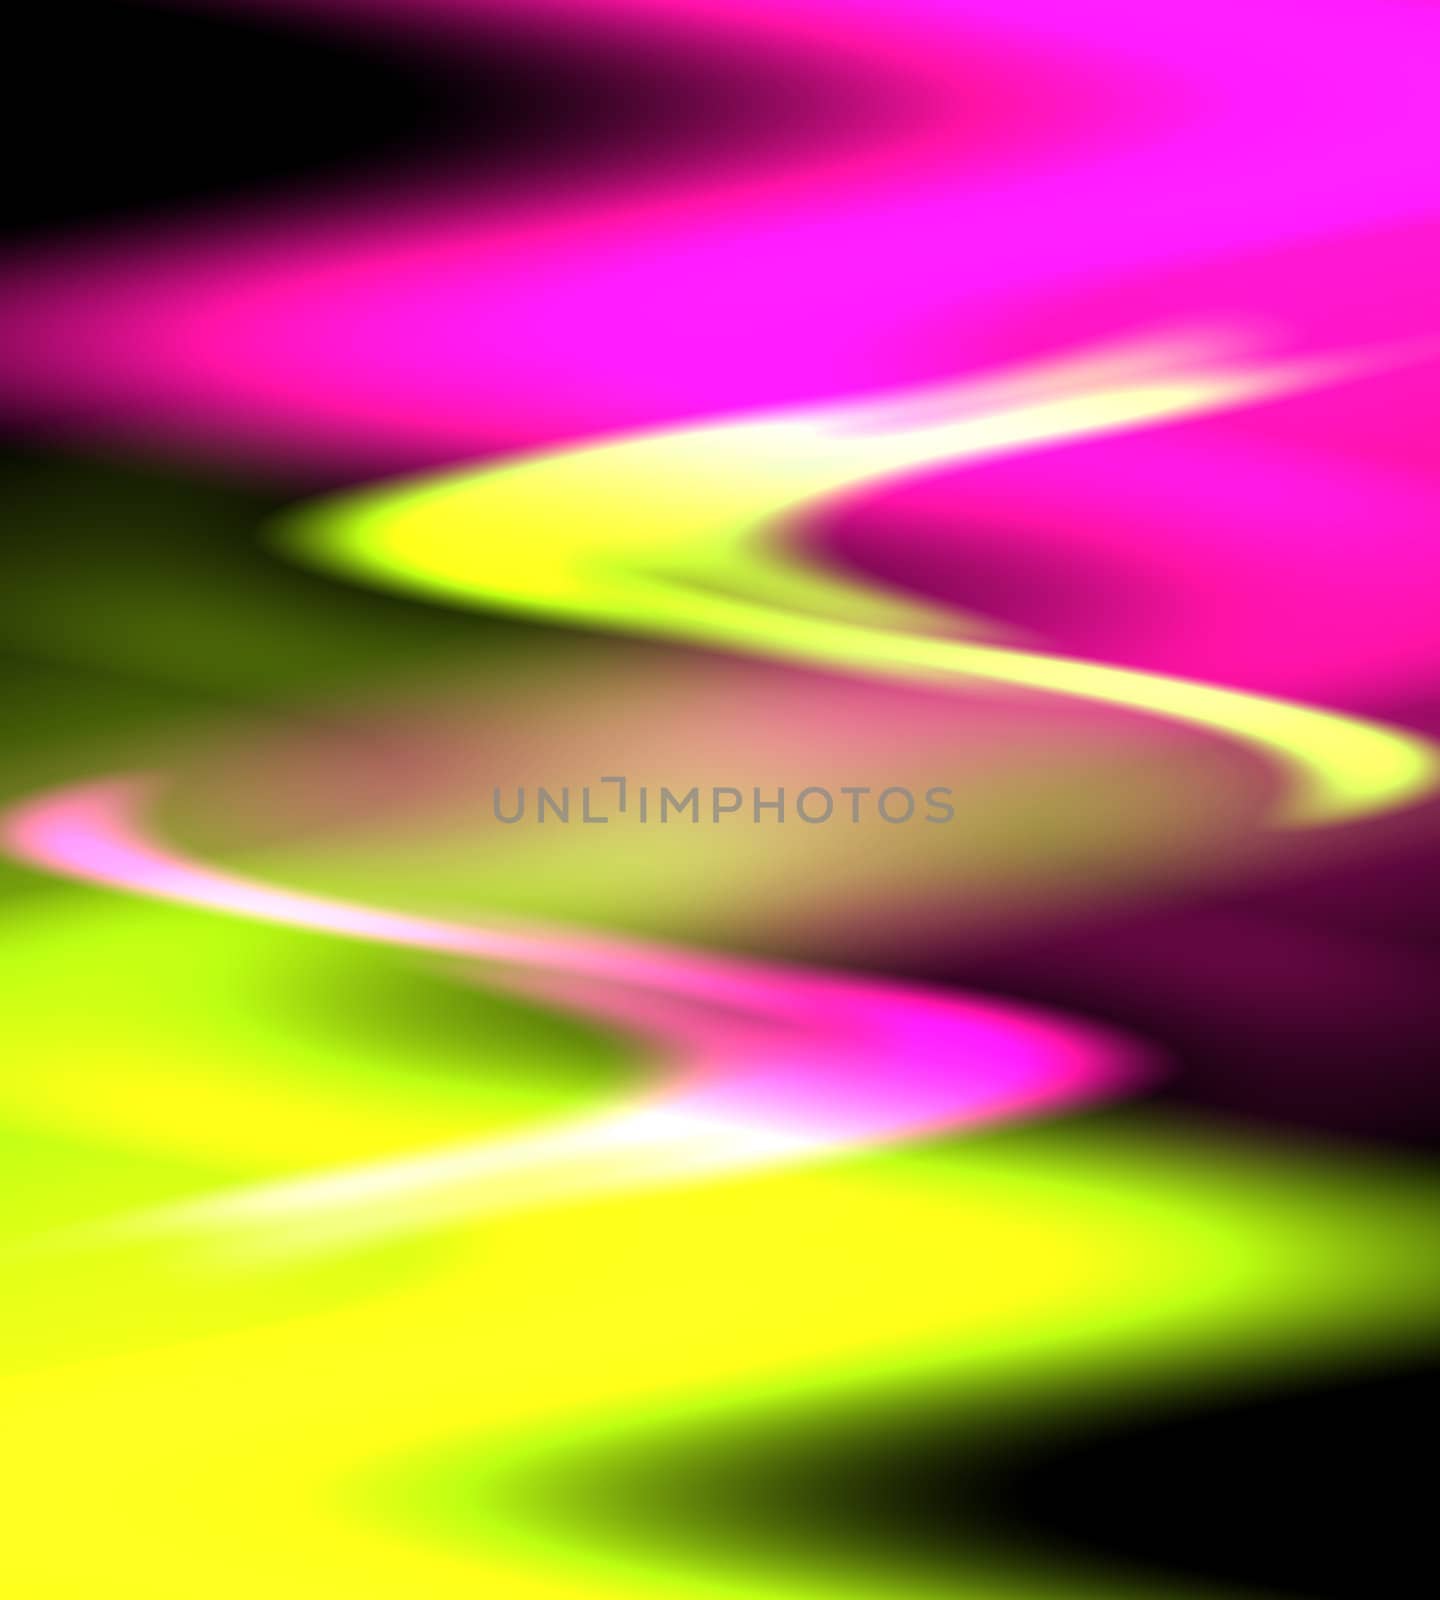 A swirly, abstract background - purple and yellow